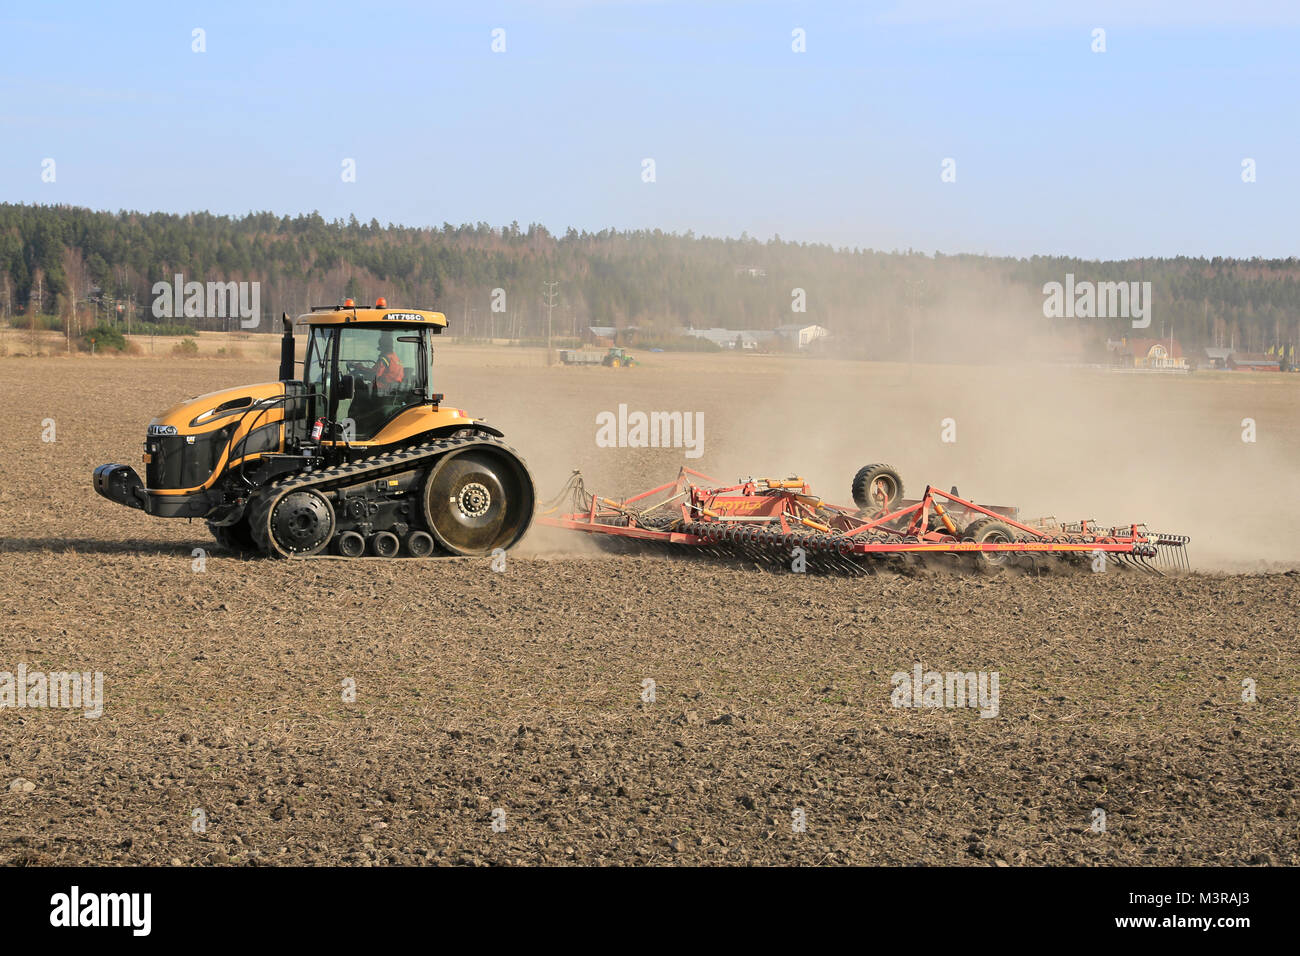 SALO, FINLAND - APRIL 19, 2014: Farmer cultivating field with Cat Challenge MT765c agricultural crawler tractor and seedbed cultivator.A crawler tract Stock Photo